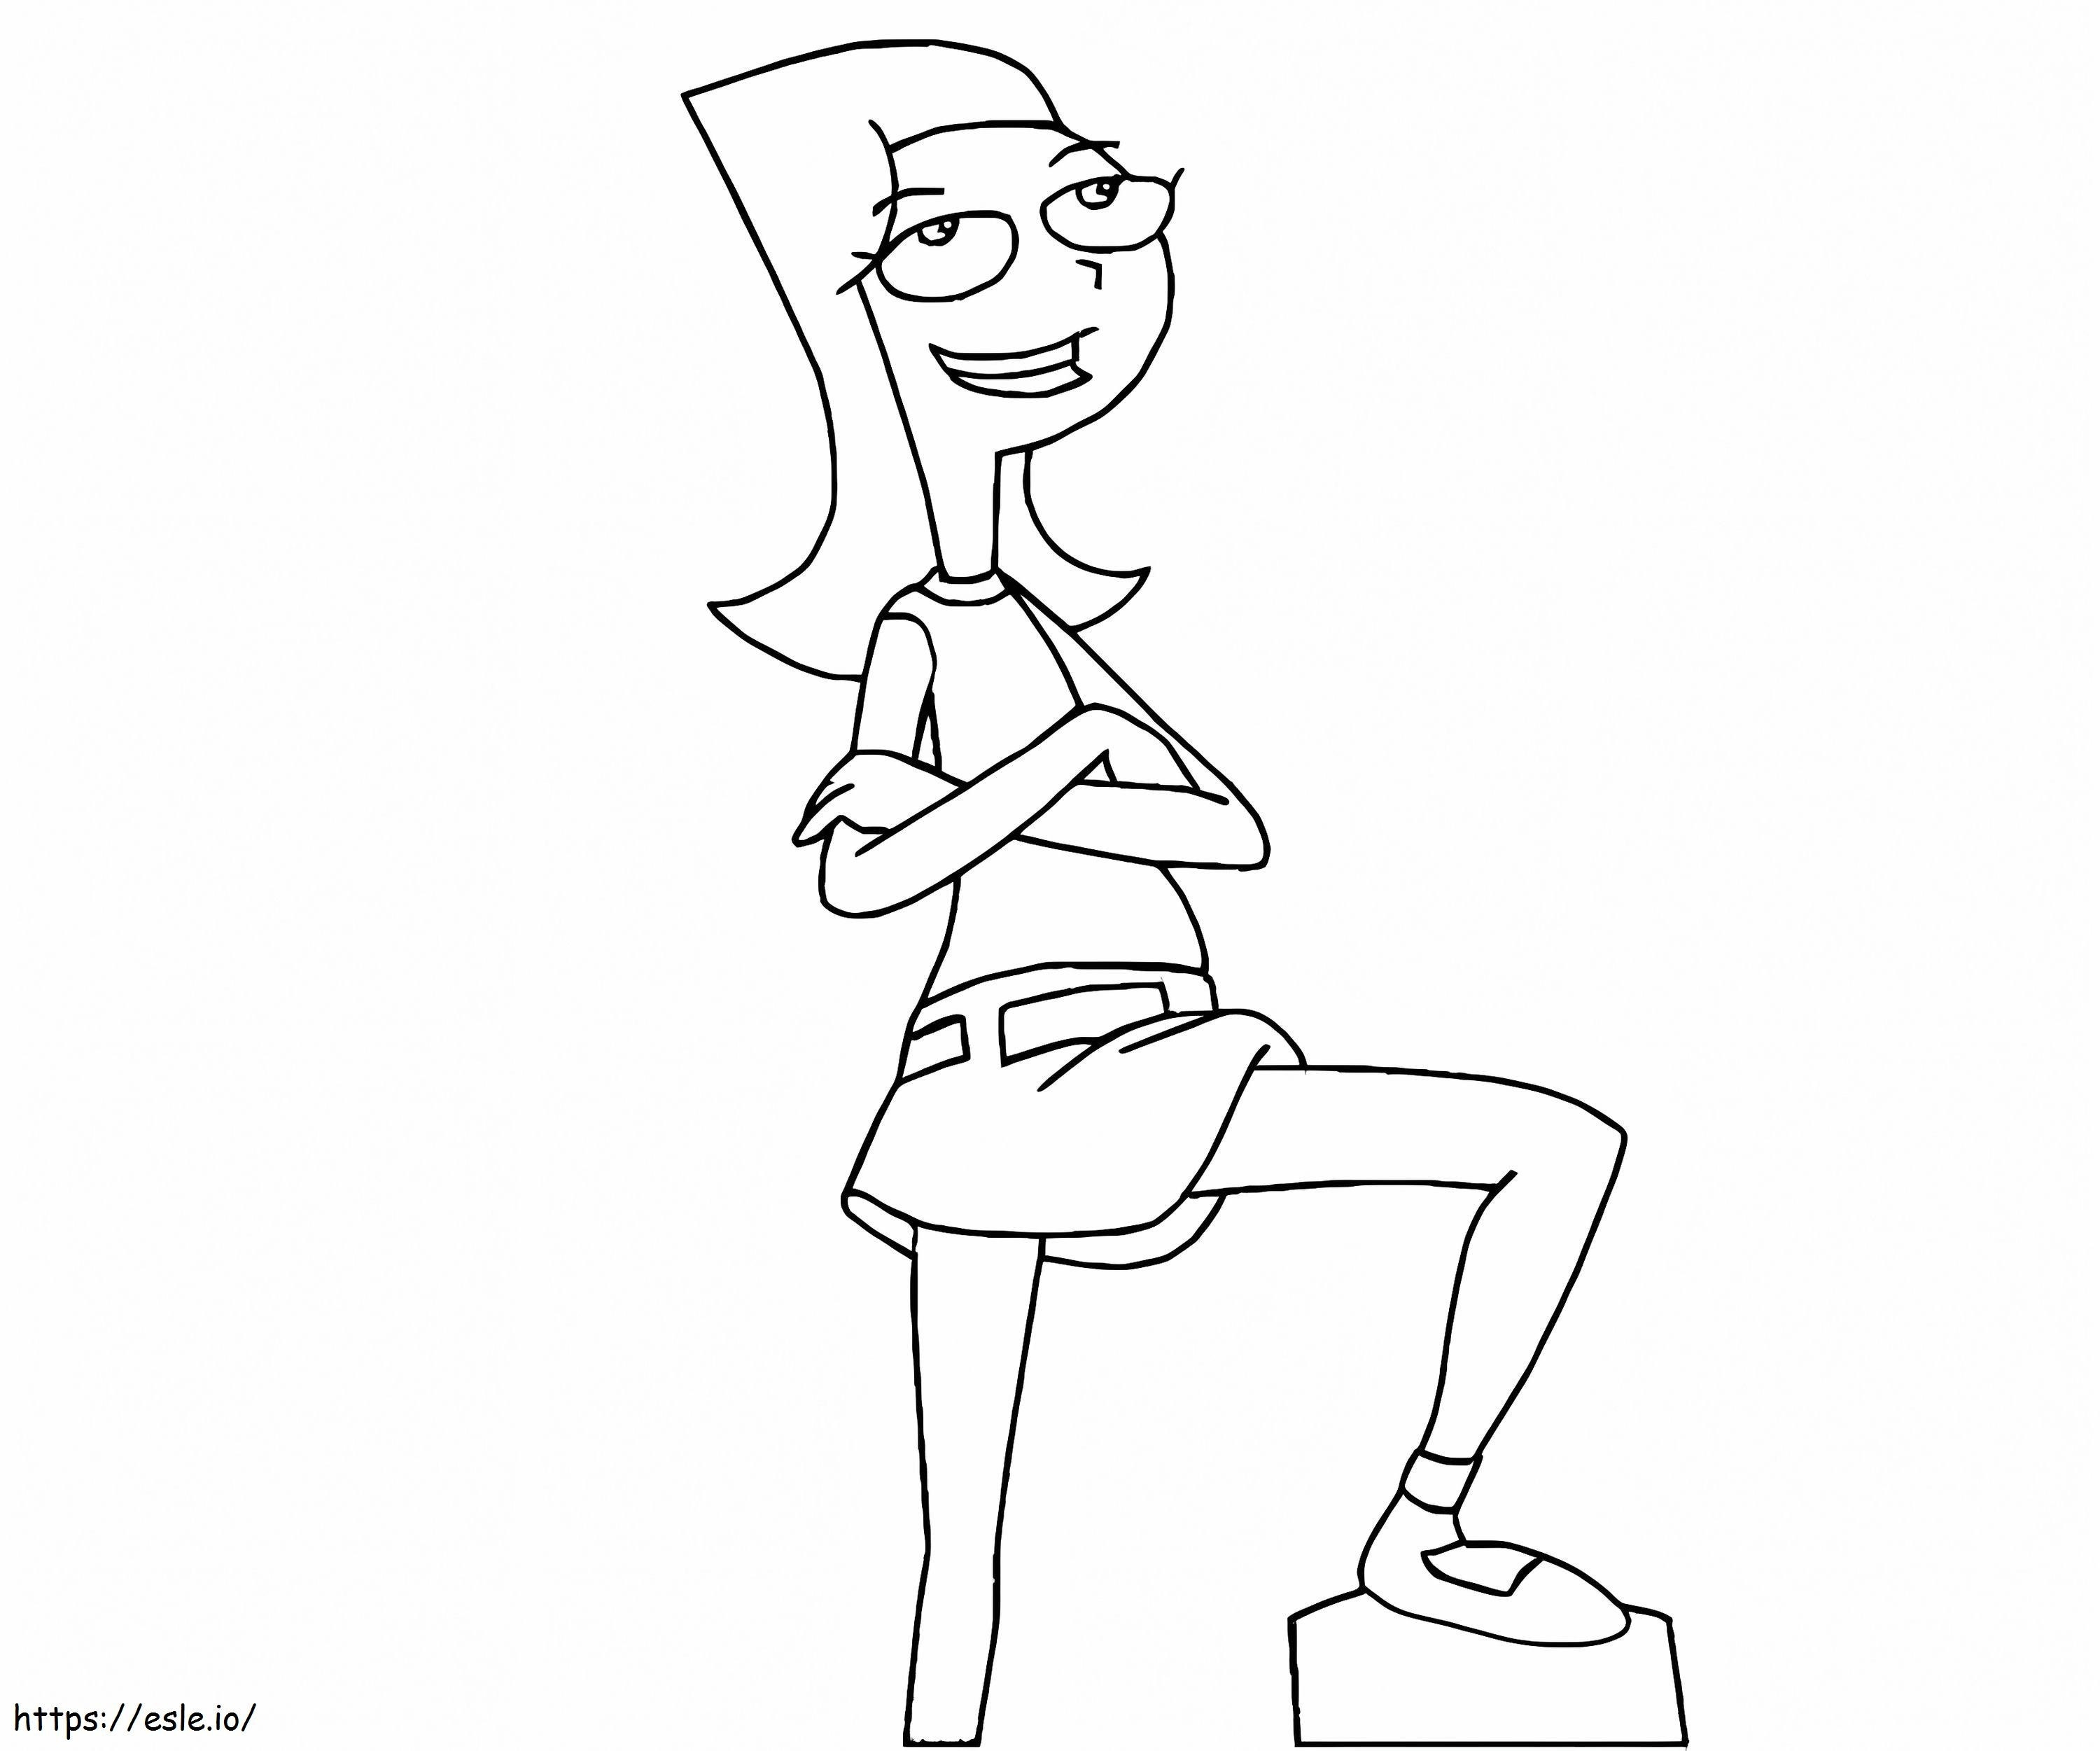 Candace Normal coloring page